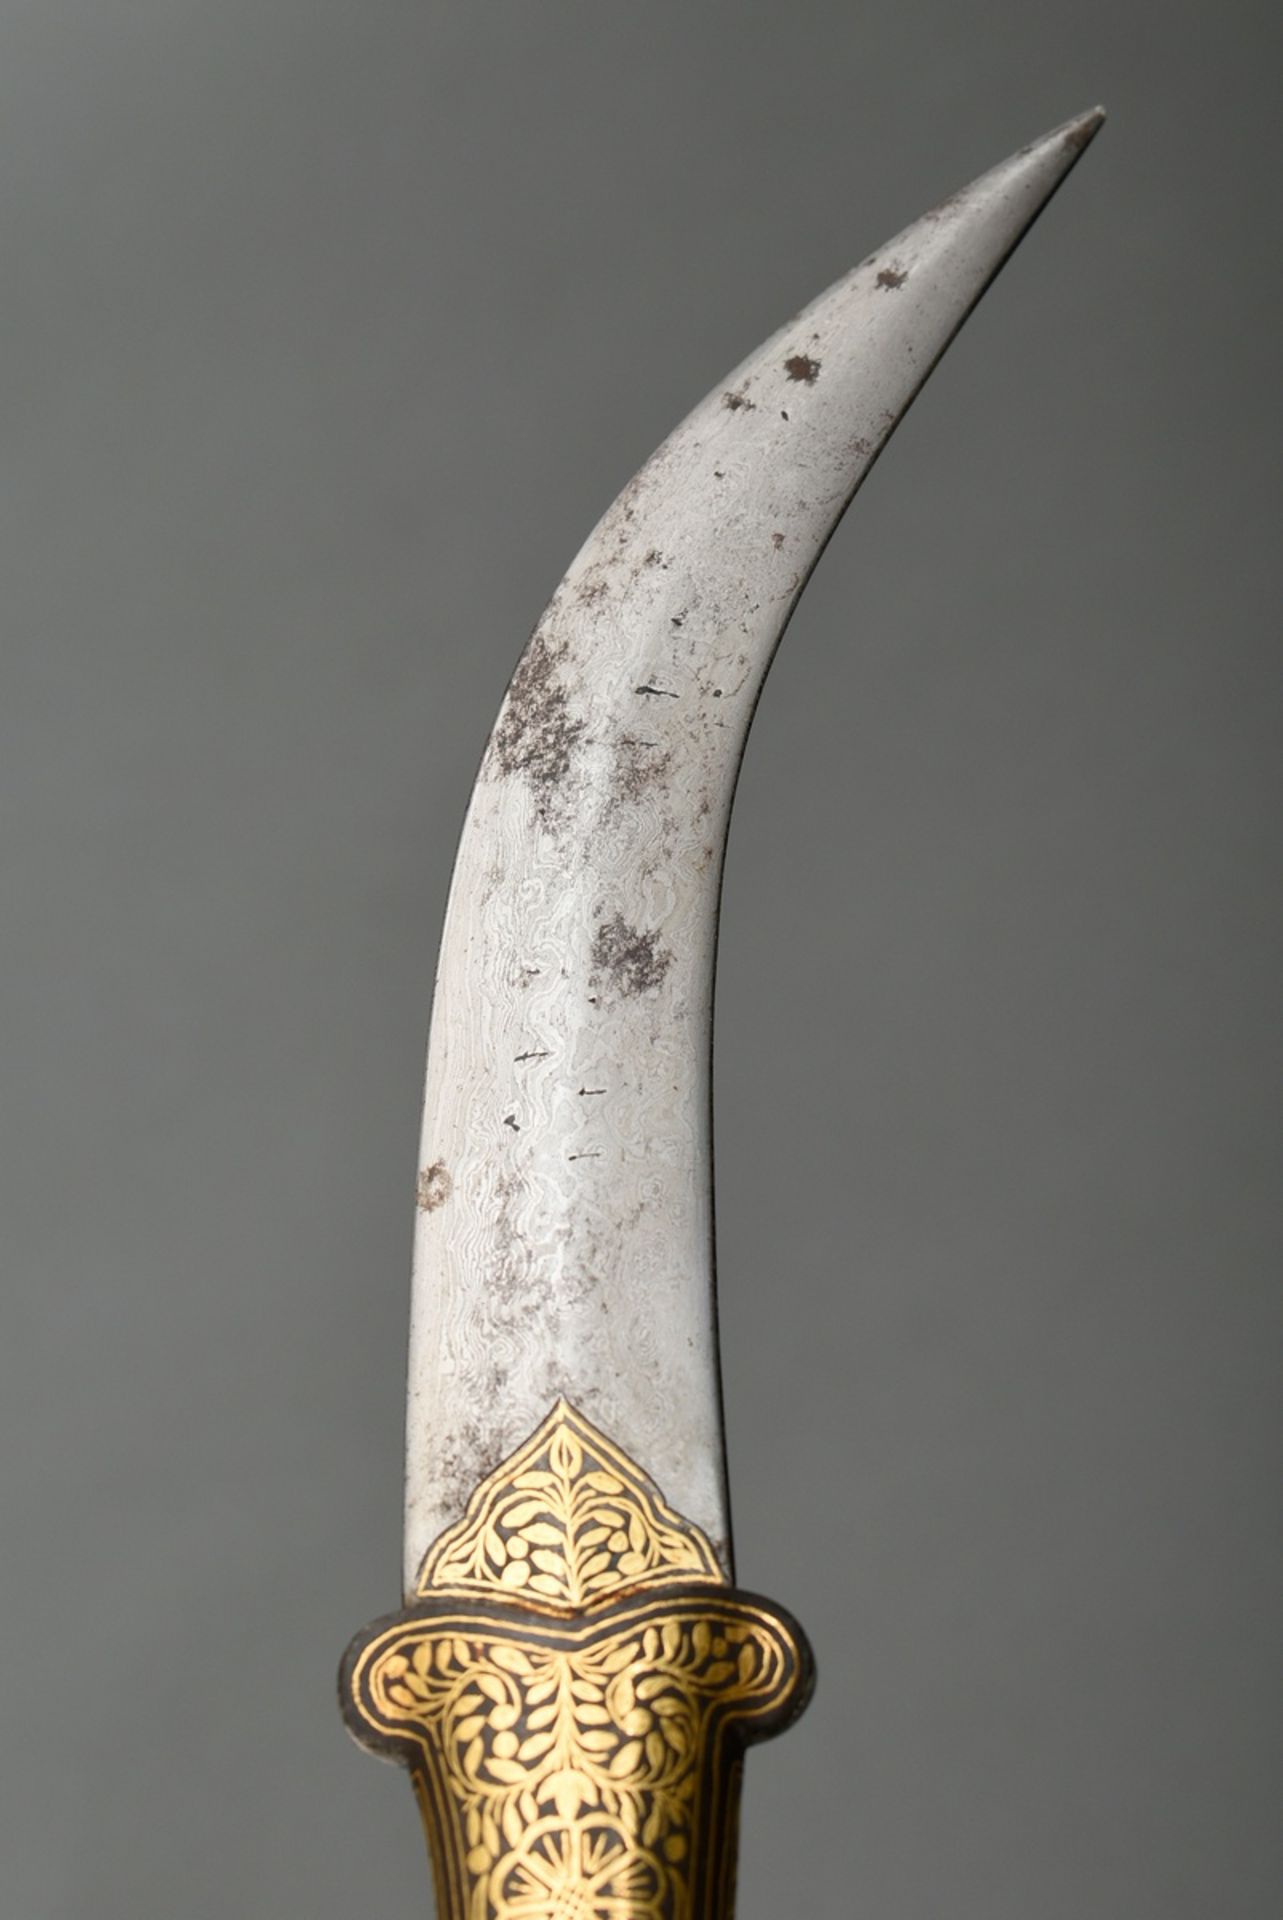 Indian "Khanjar" dagger with sculpted "sheep's head" handle end, inlaid with glass cabochons, handl - Image 4 of 5